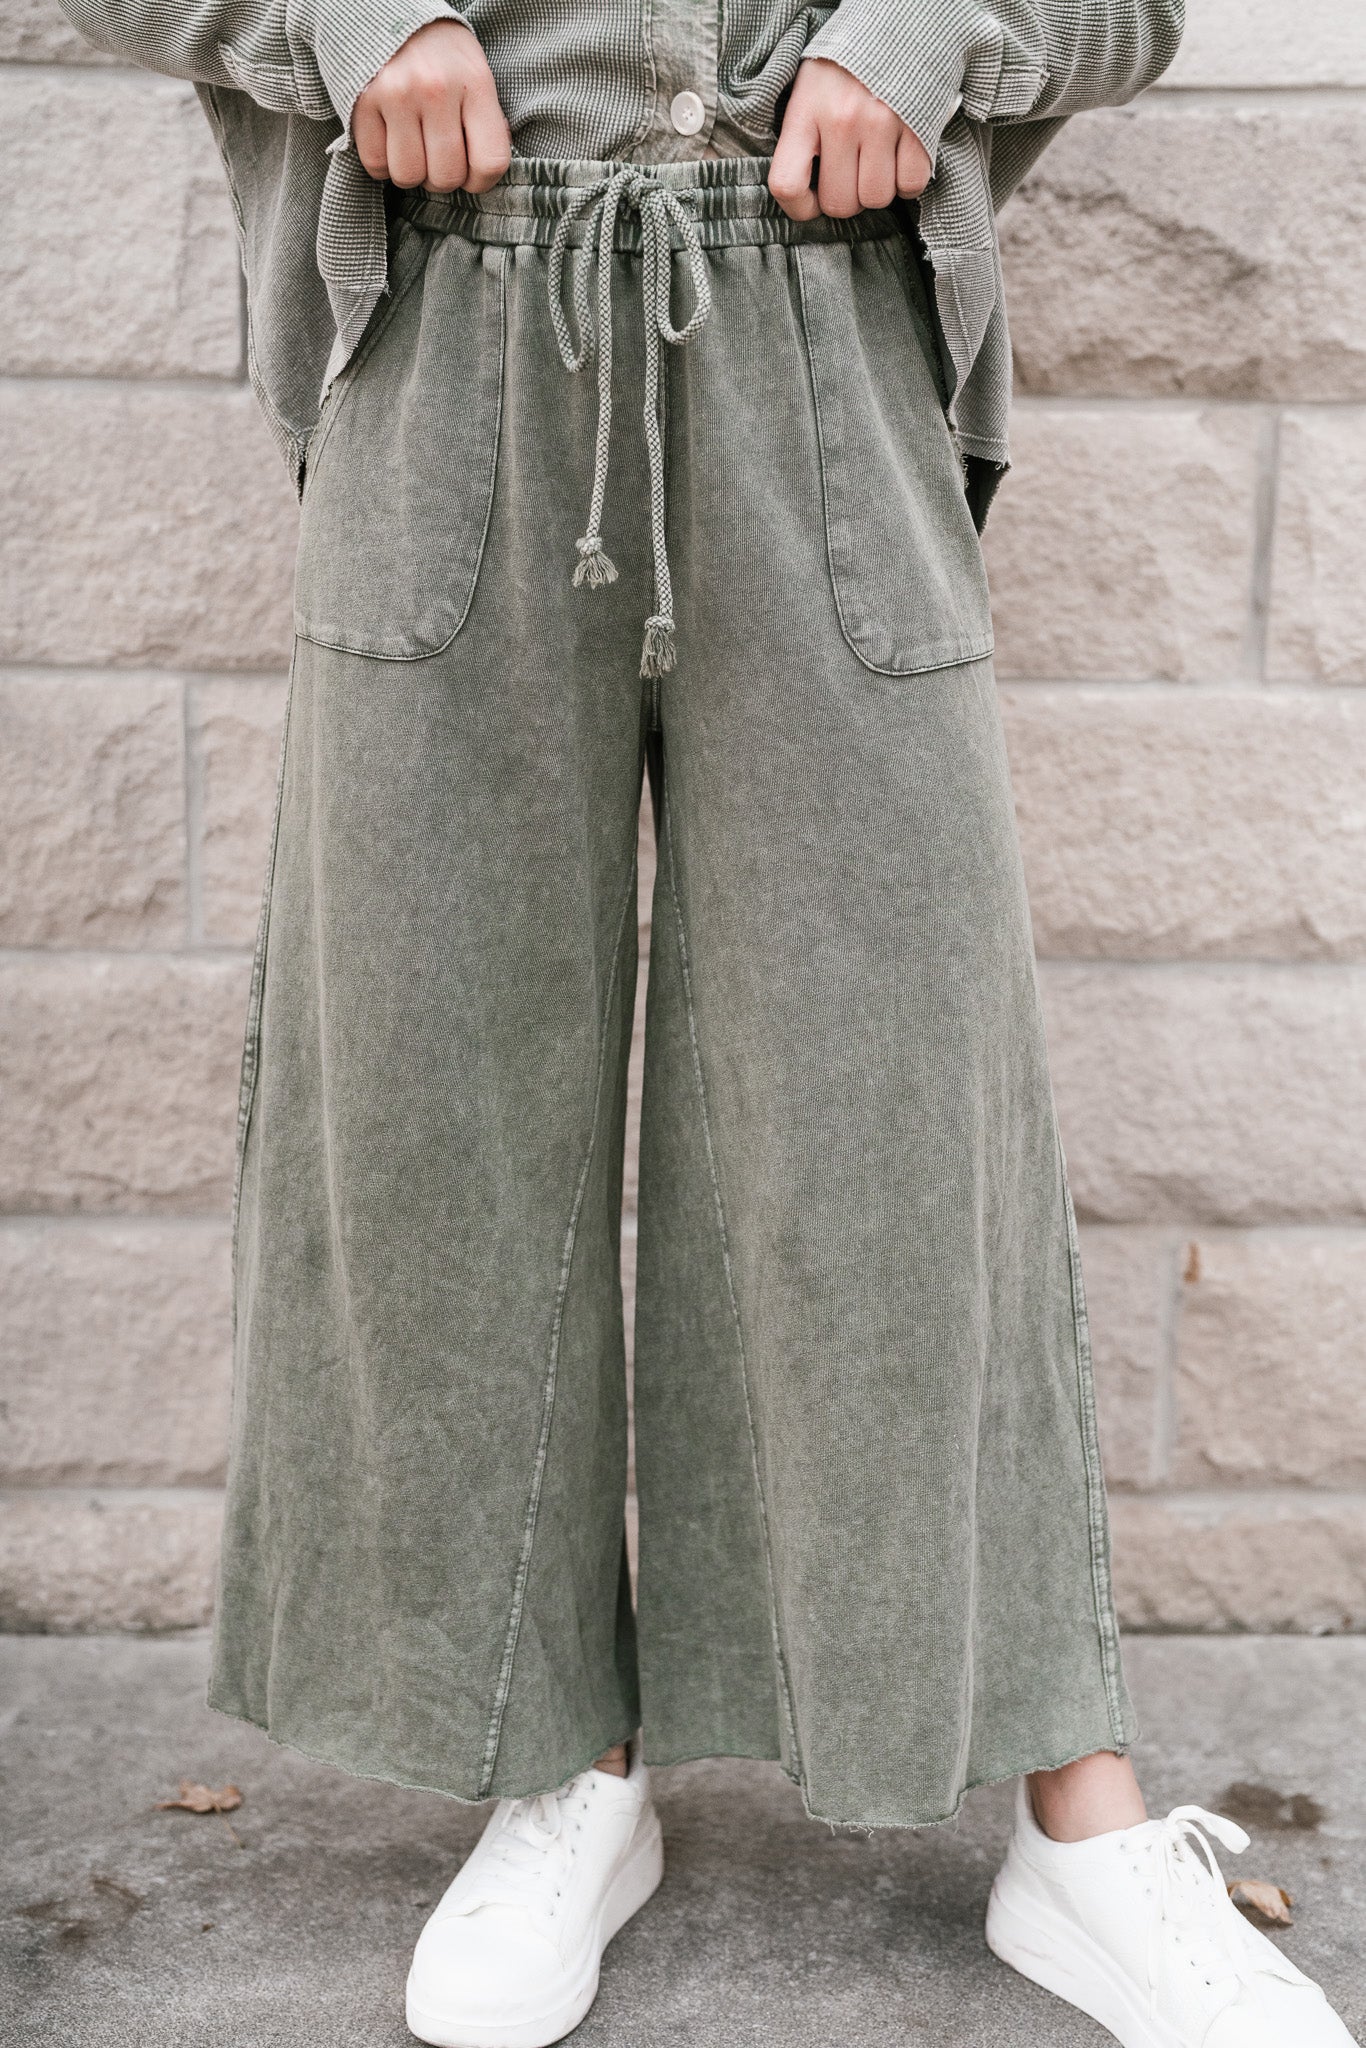 Can't Be Matched Mineral Wash Wide Leg Pants - Olive